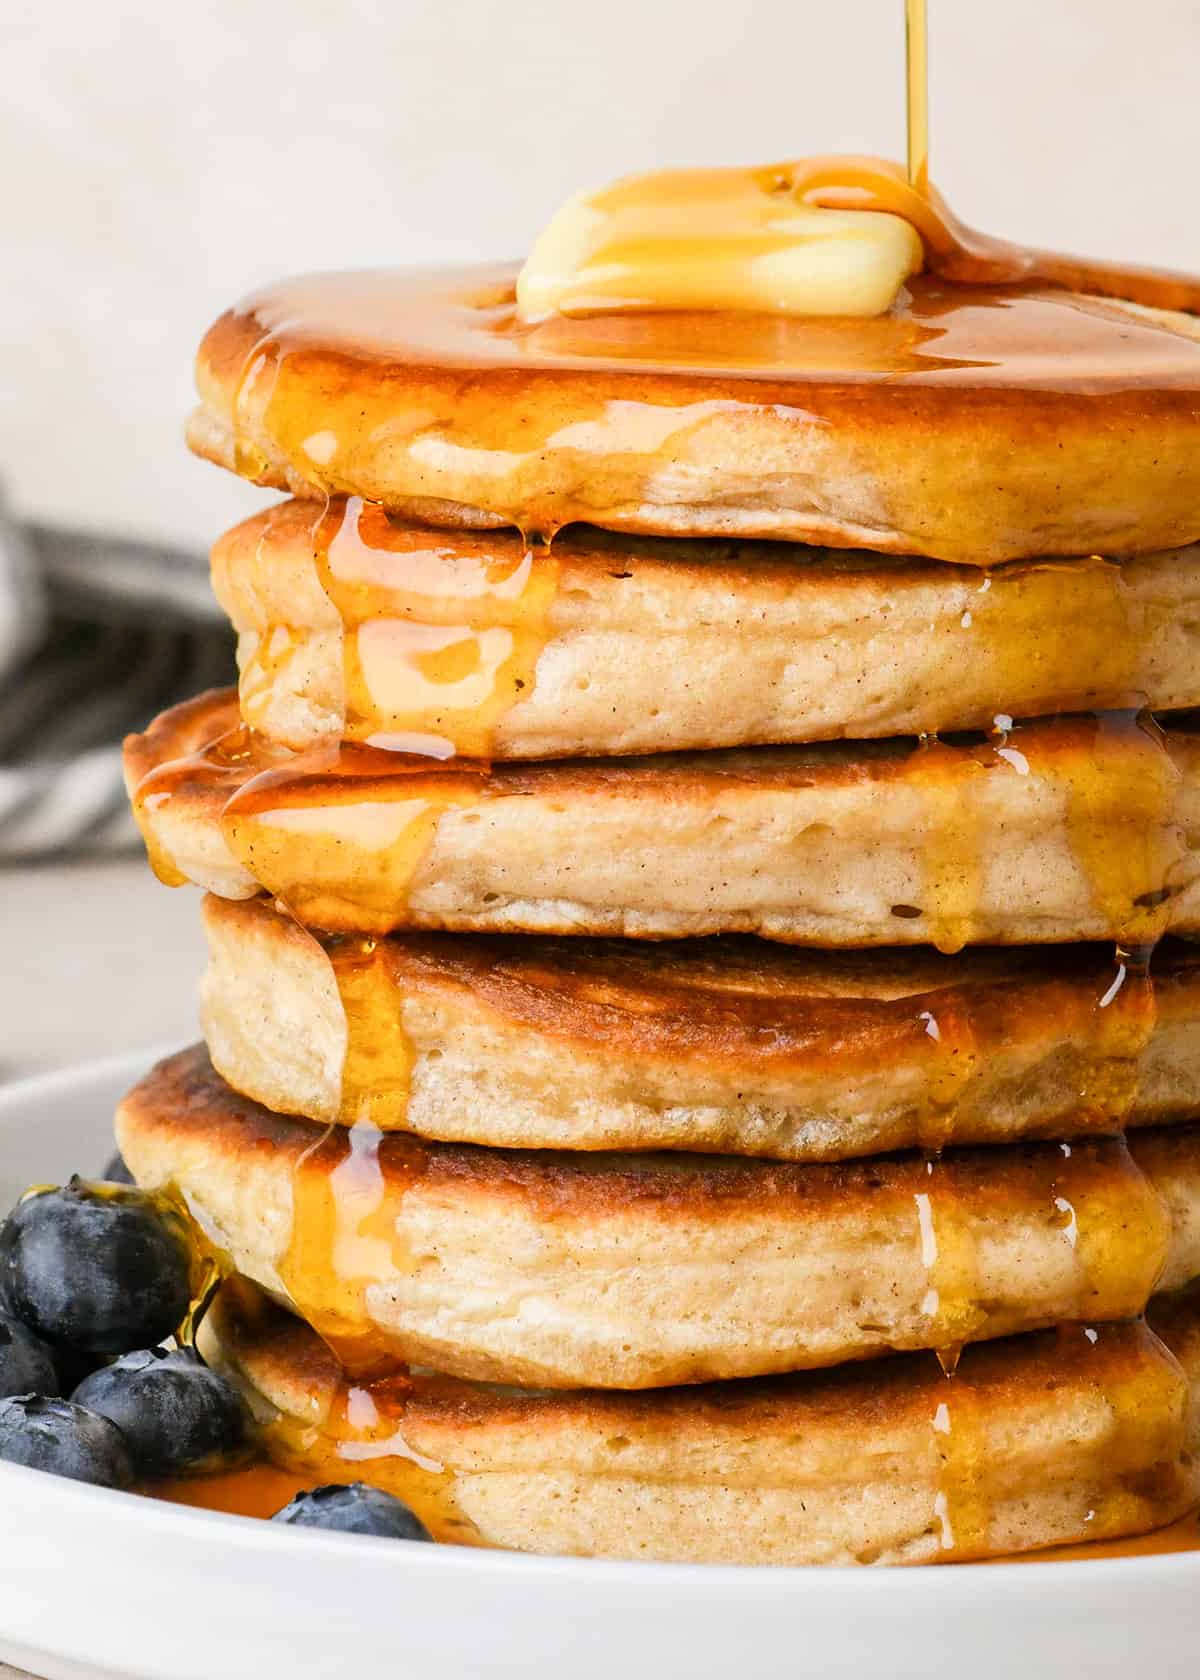 a stack of 6 pancakes made with Homemade Pancake Mix topped with butter and syrup